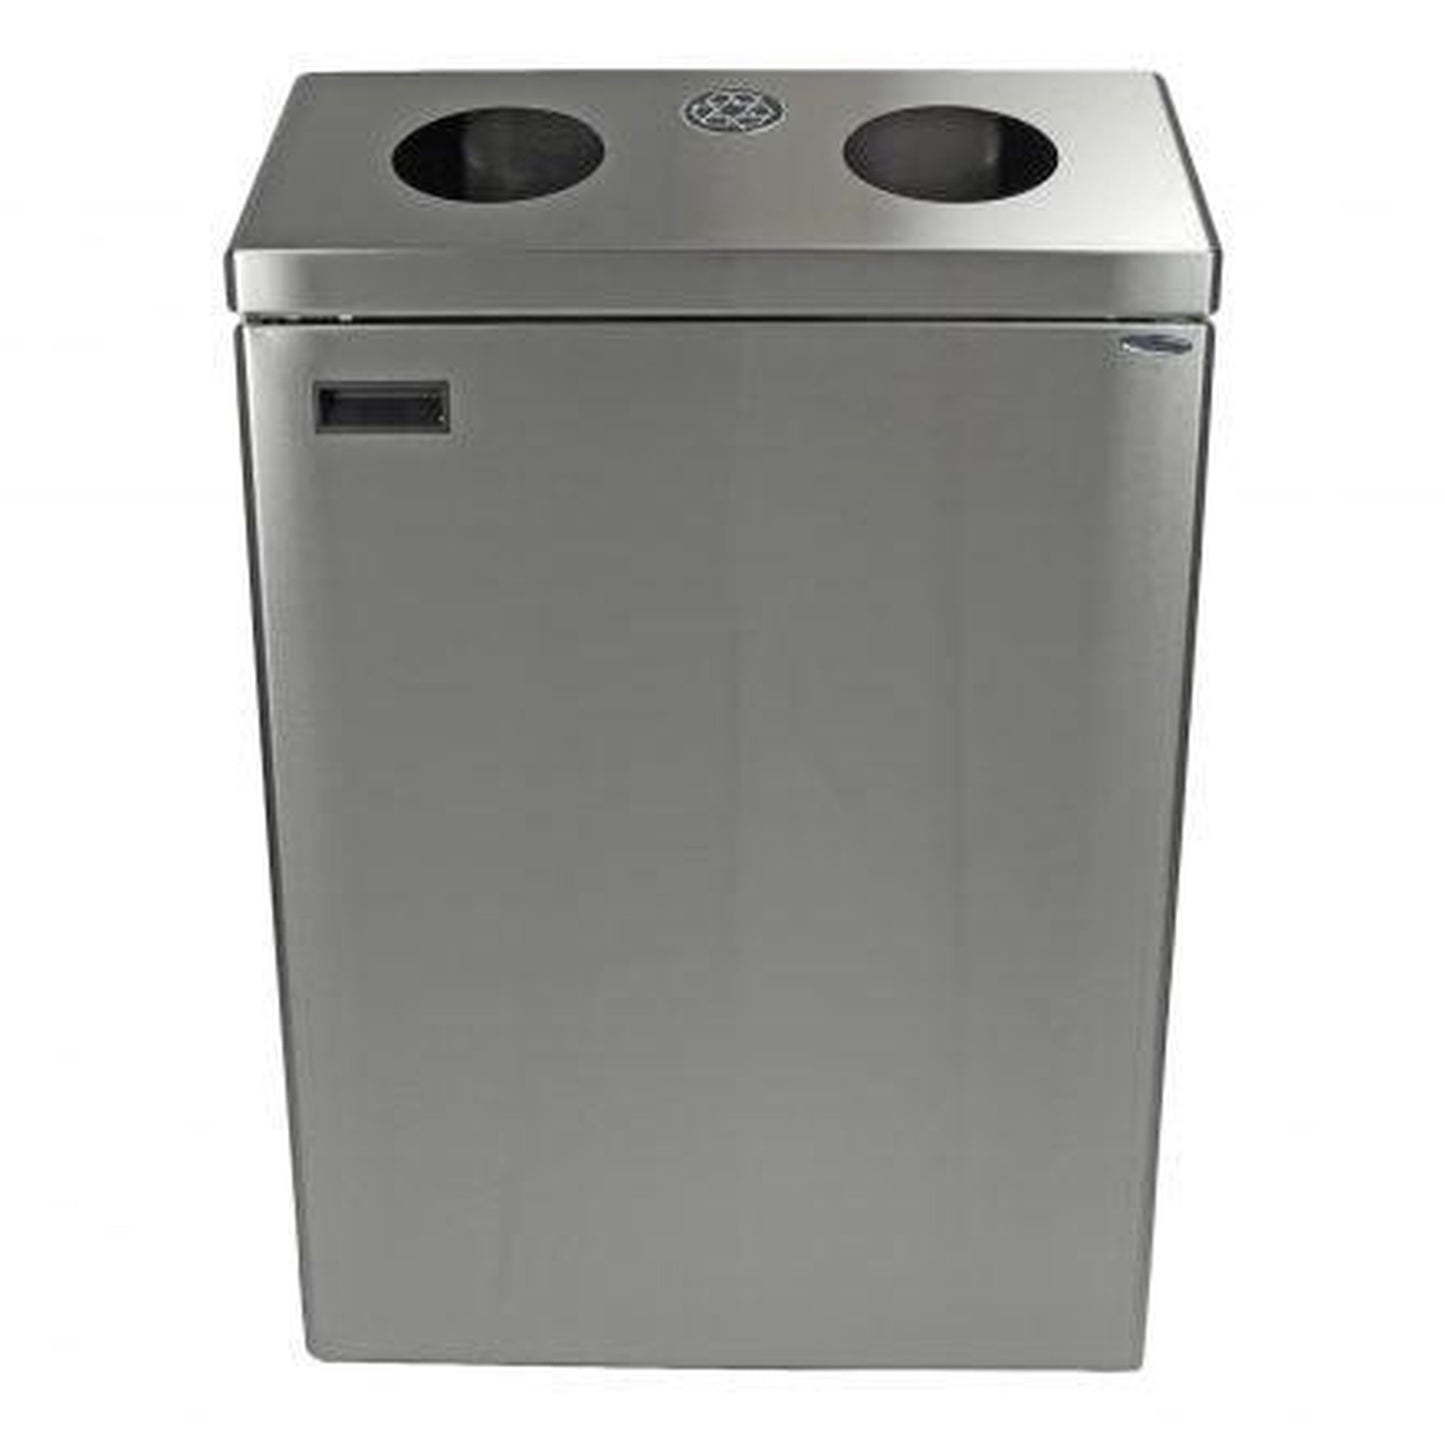 Frost 26.4 x 12.2 x 38.4 Stainless Steel Satin Waste Receptacles